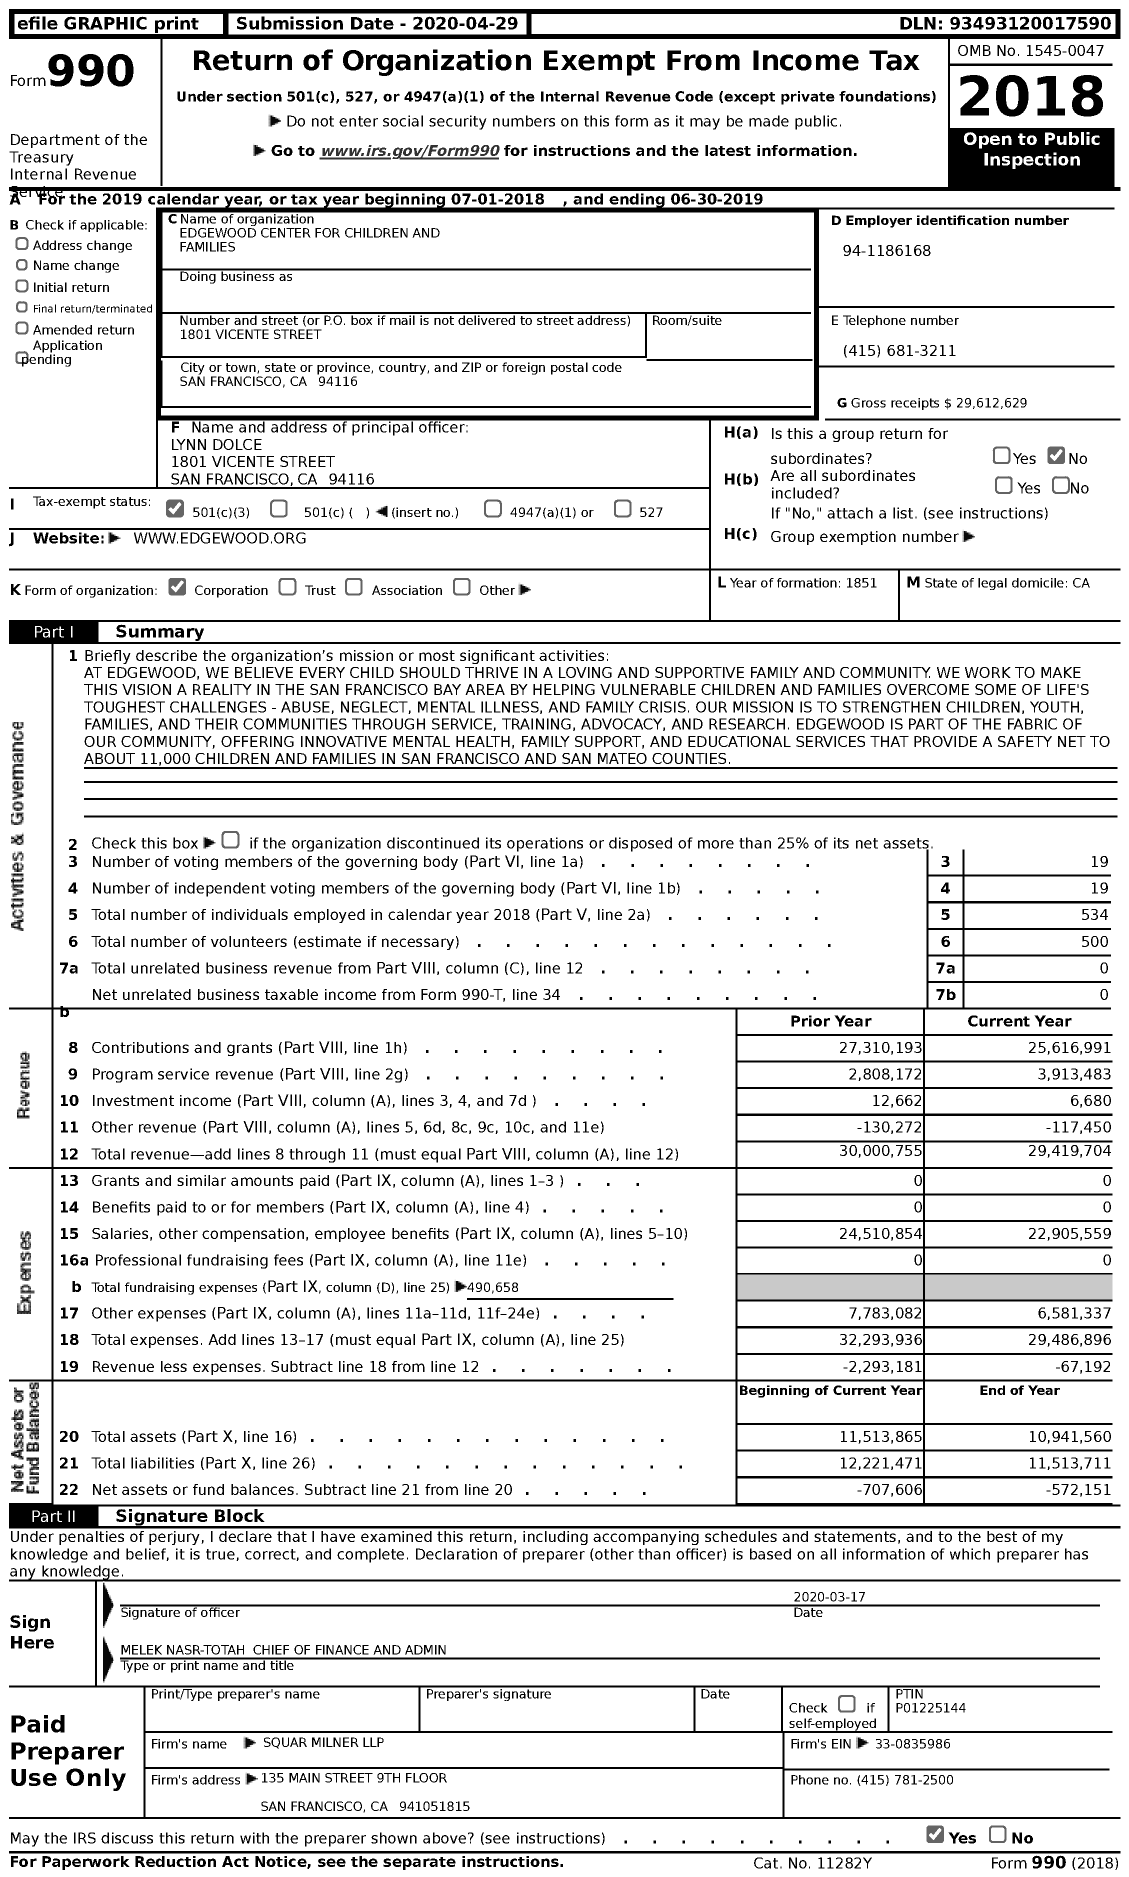 Image of first page of 2018 Form 990 for Edgewood Center for Children and Families